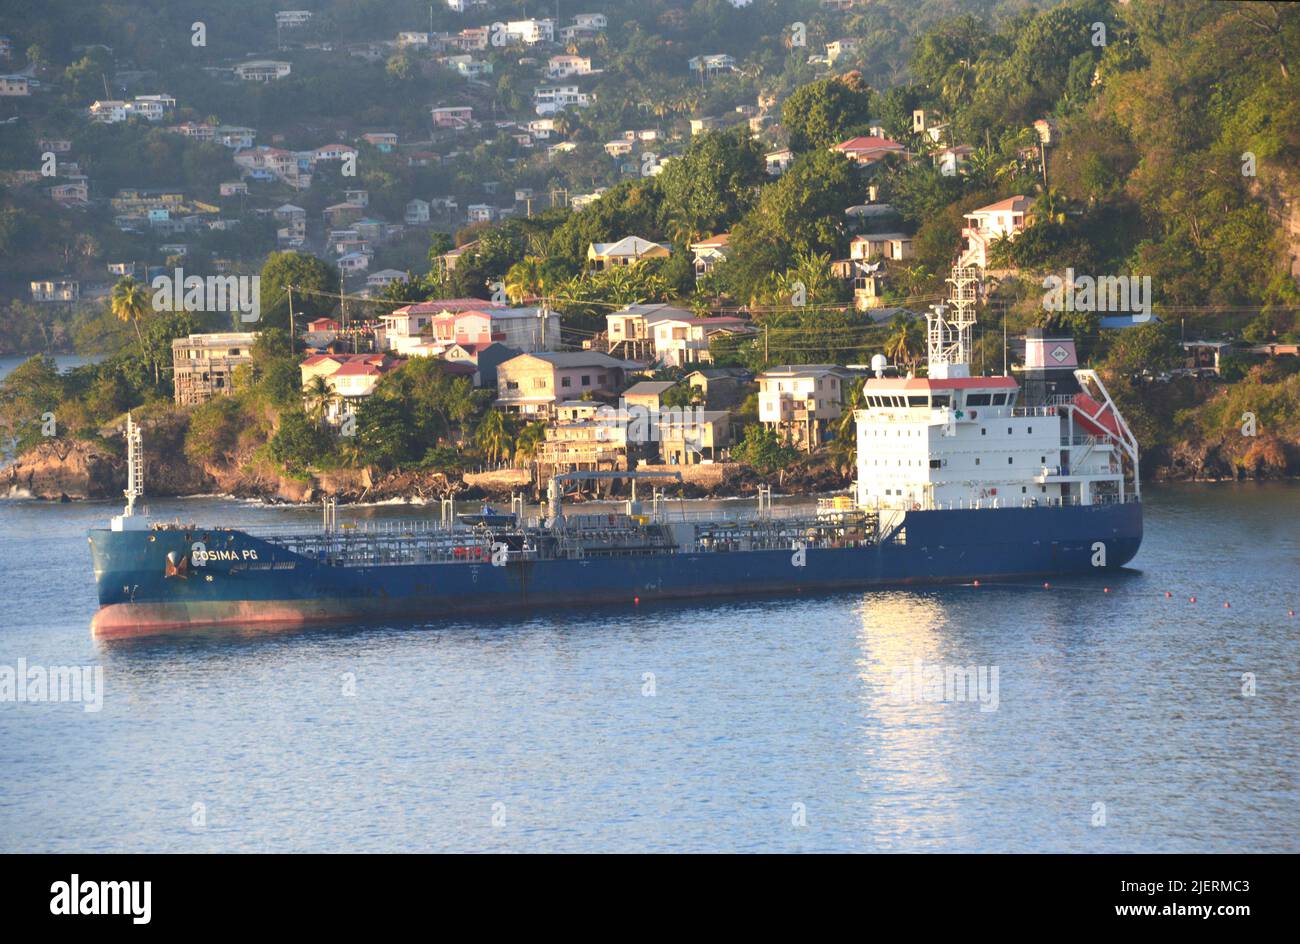 COSIMA PG (IMO: 9857822) a UK Registered Oil/Chemical Tanker Anchoured outside St George's Harbour on the Caribbean Island of Grenada. Stock Photo